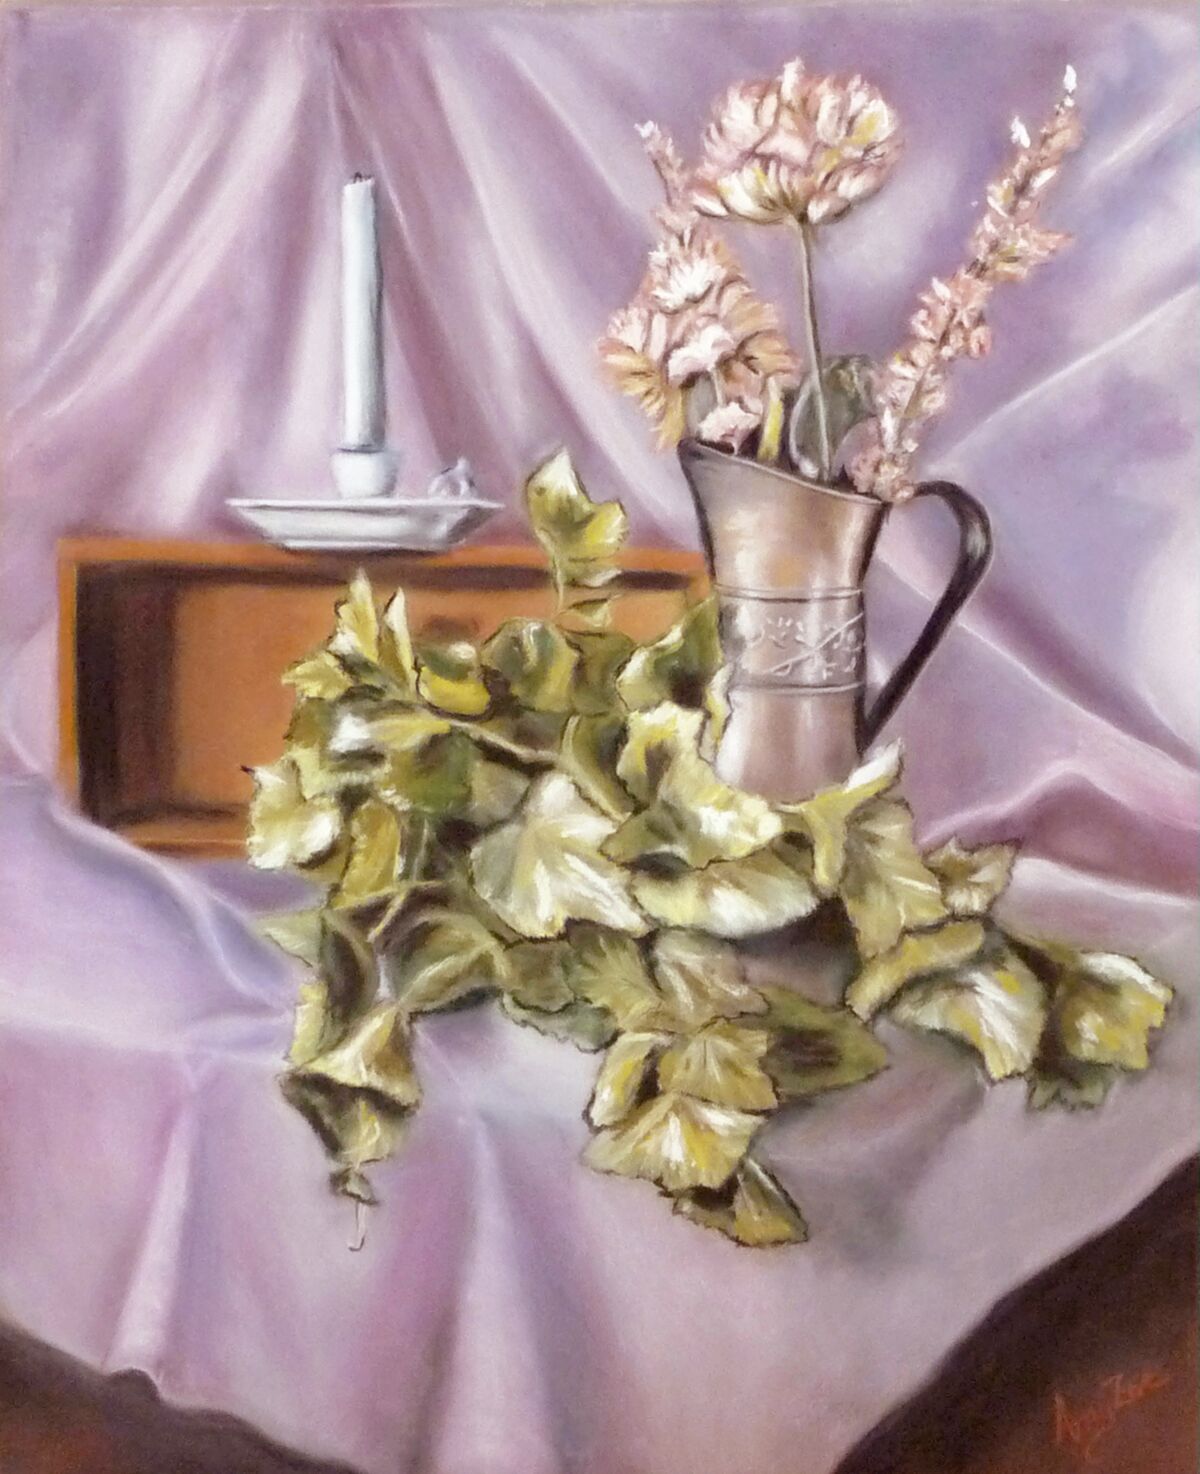 One of Amy Bekier's paintings. This one is "Still Life with Copper Vase."